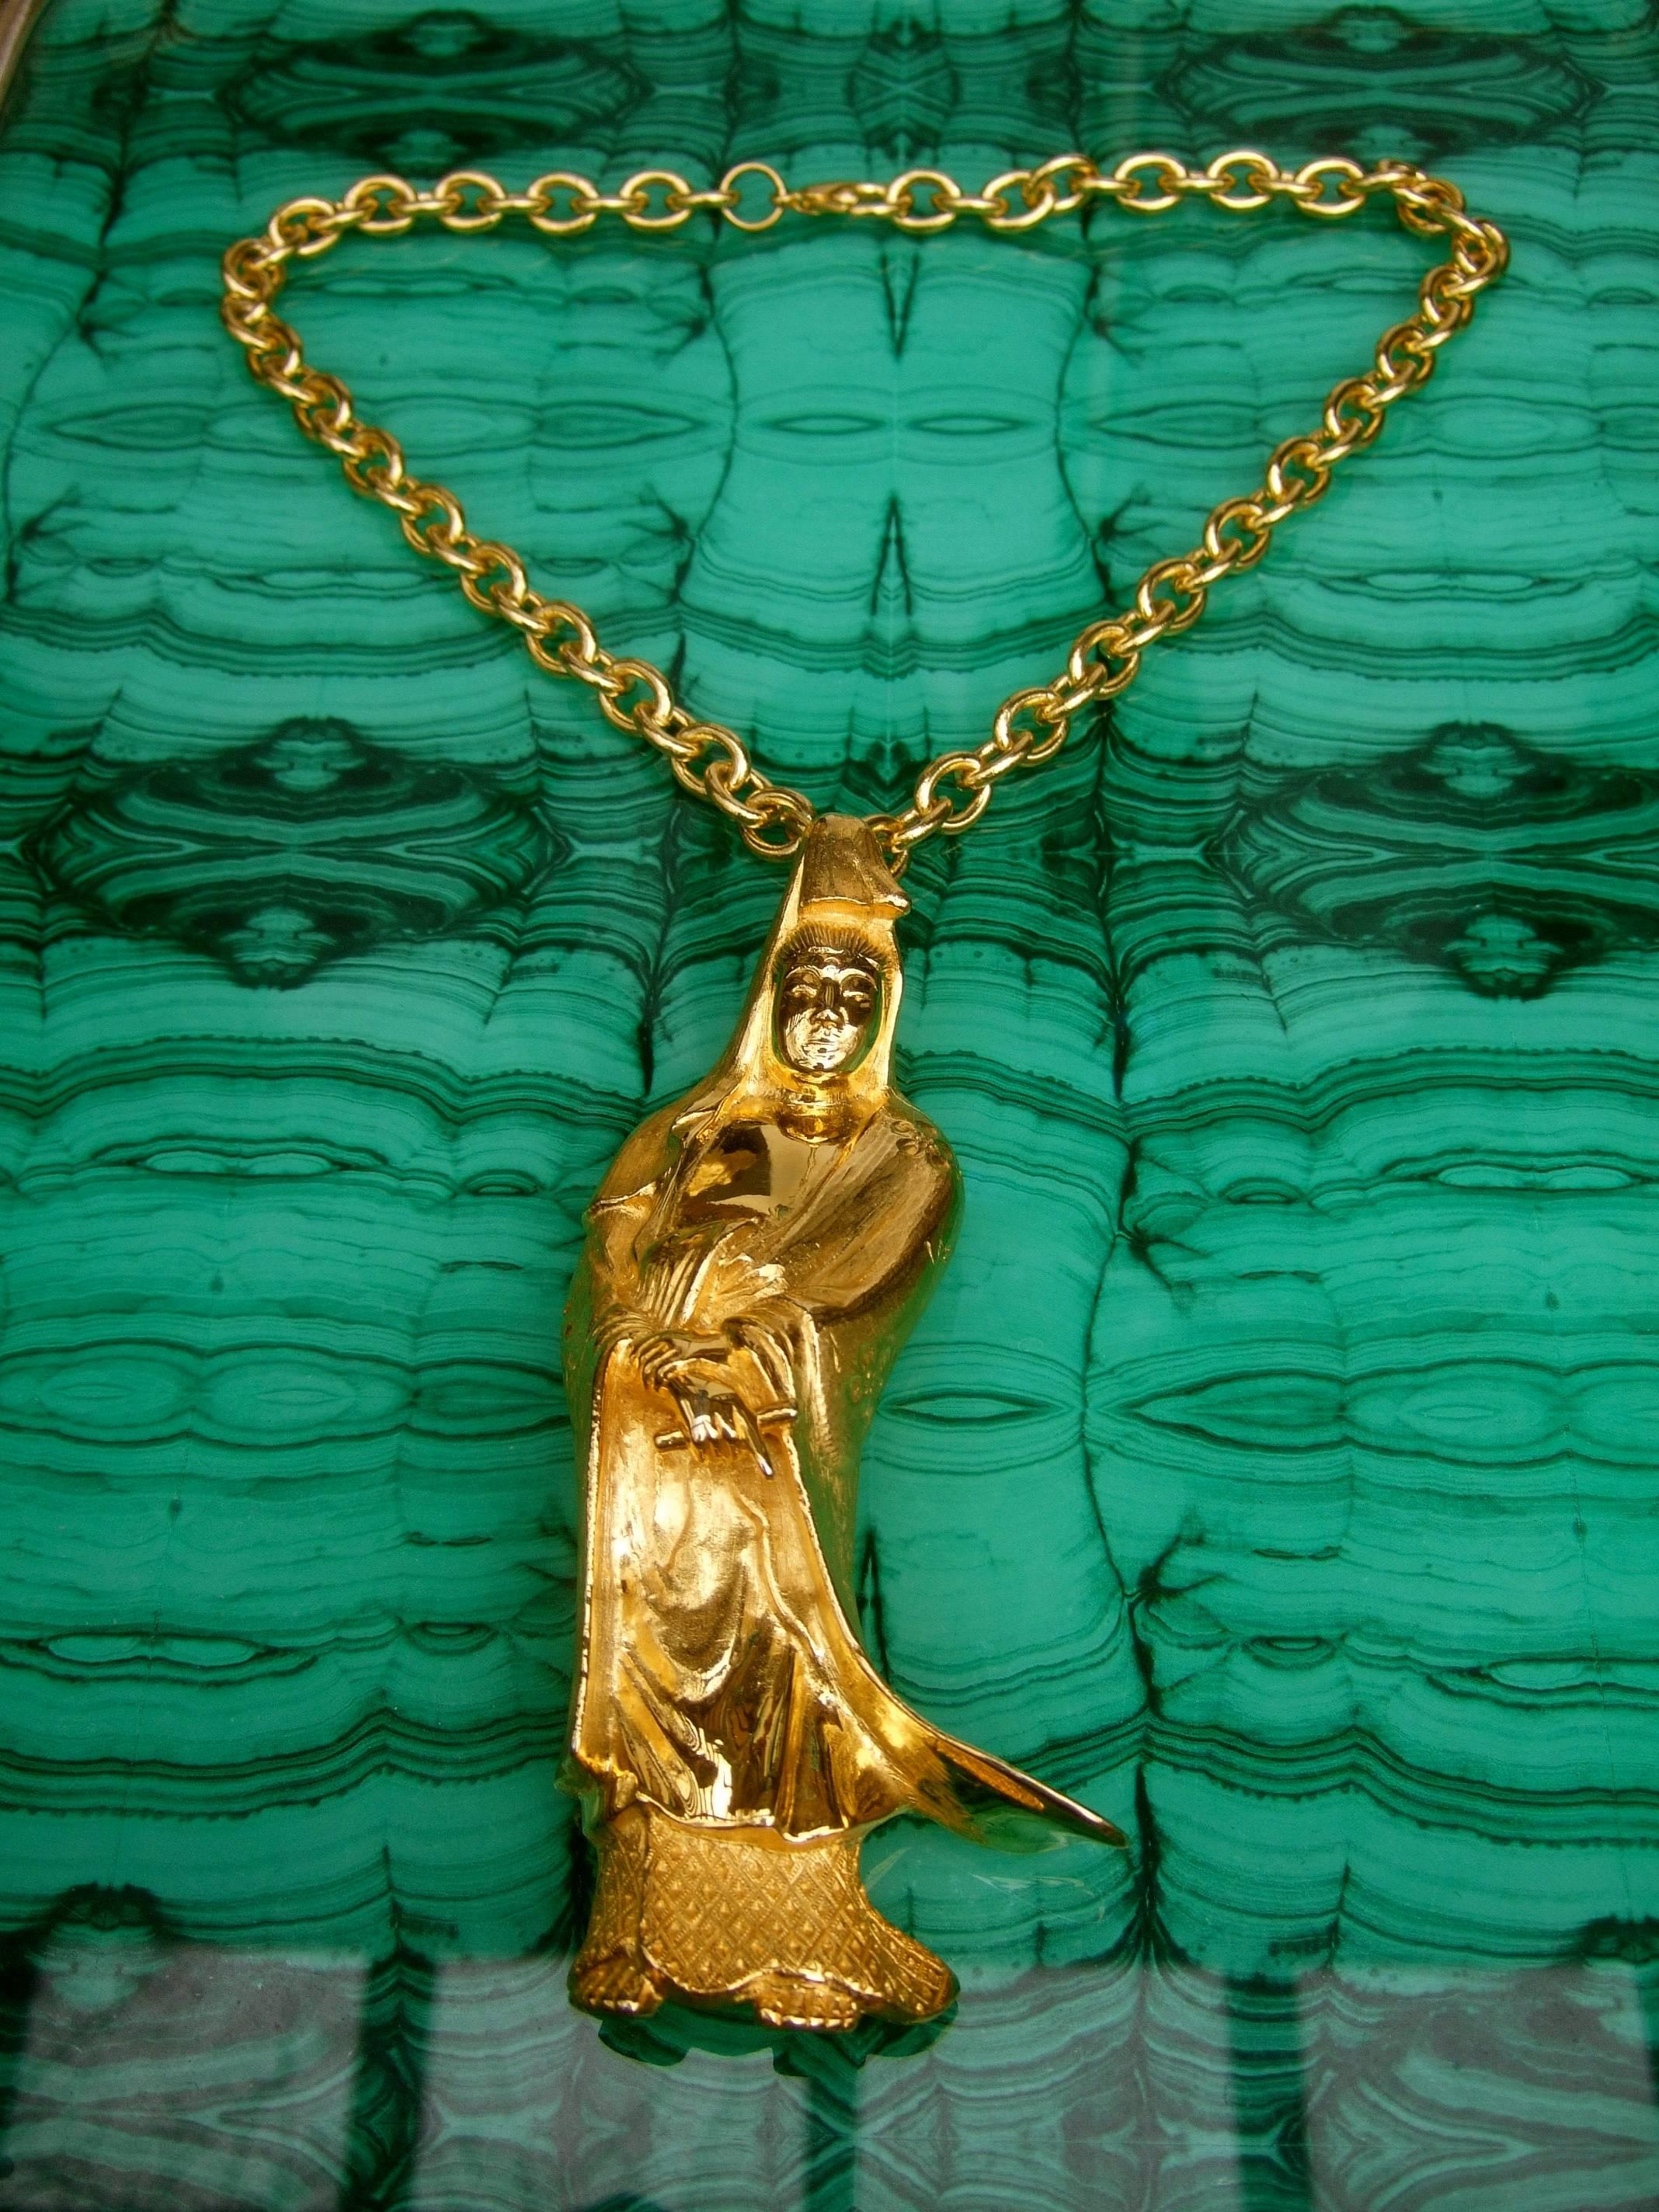 Judith Leiber Massive figural gilt metal pendant - brooch necklace c 1970s
The Asian theme pendant necklace is designed with a huge Japanese 
style immortal figure suspended from a heavy gauge gilt metal chain

The Japanese style figure can be